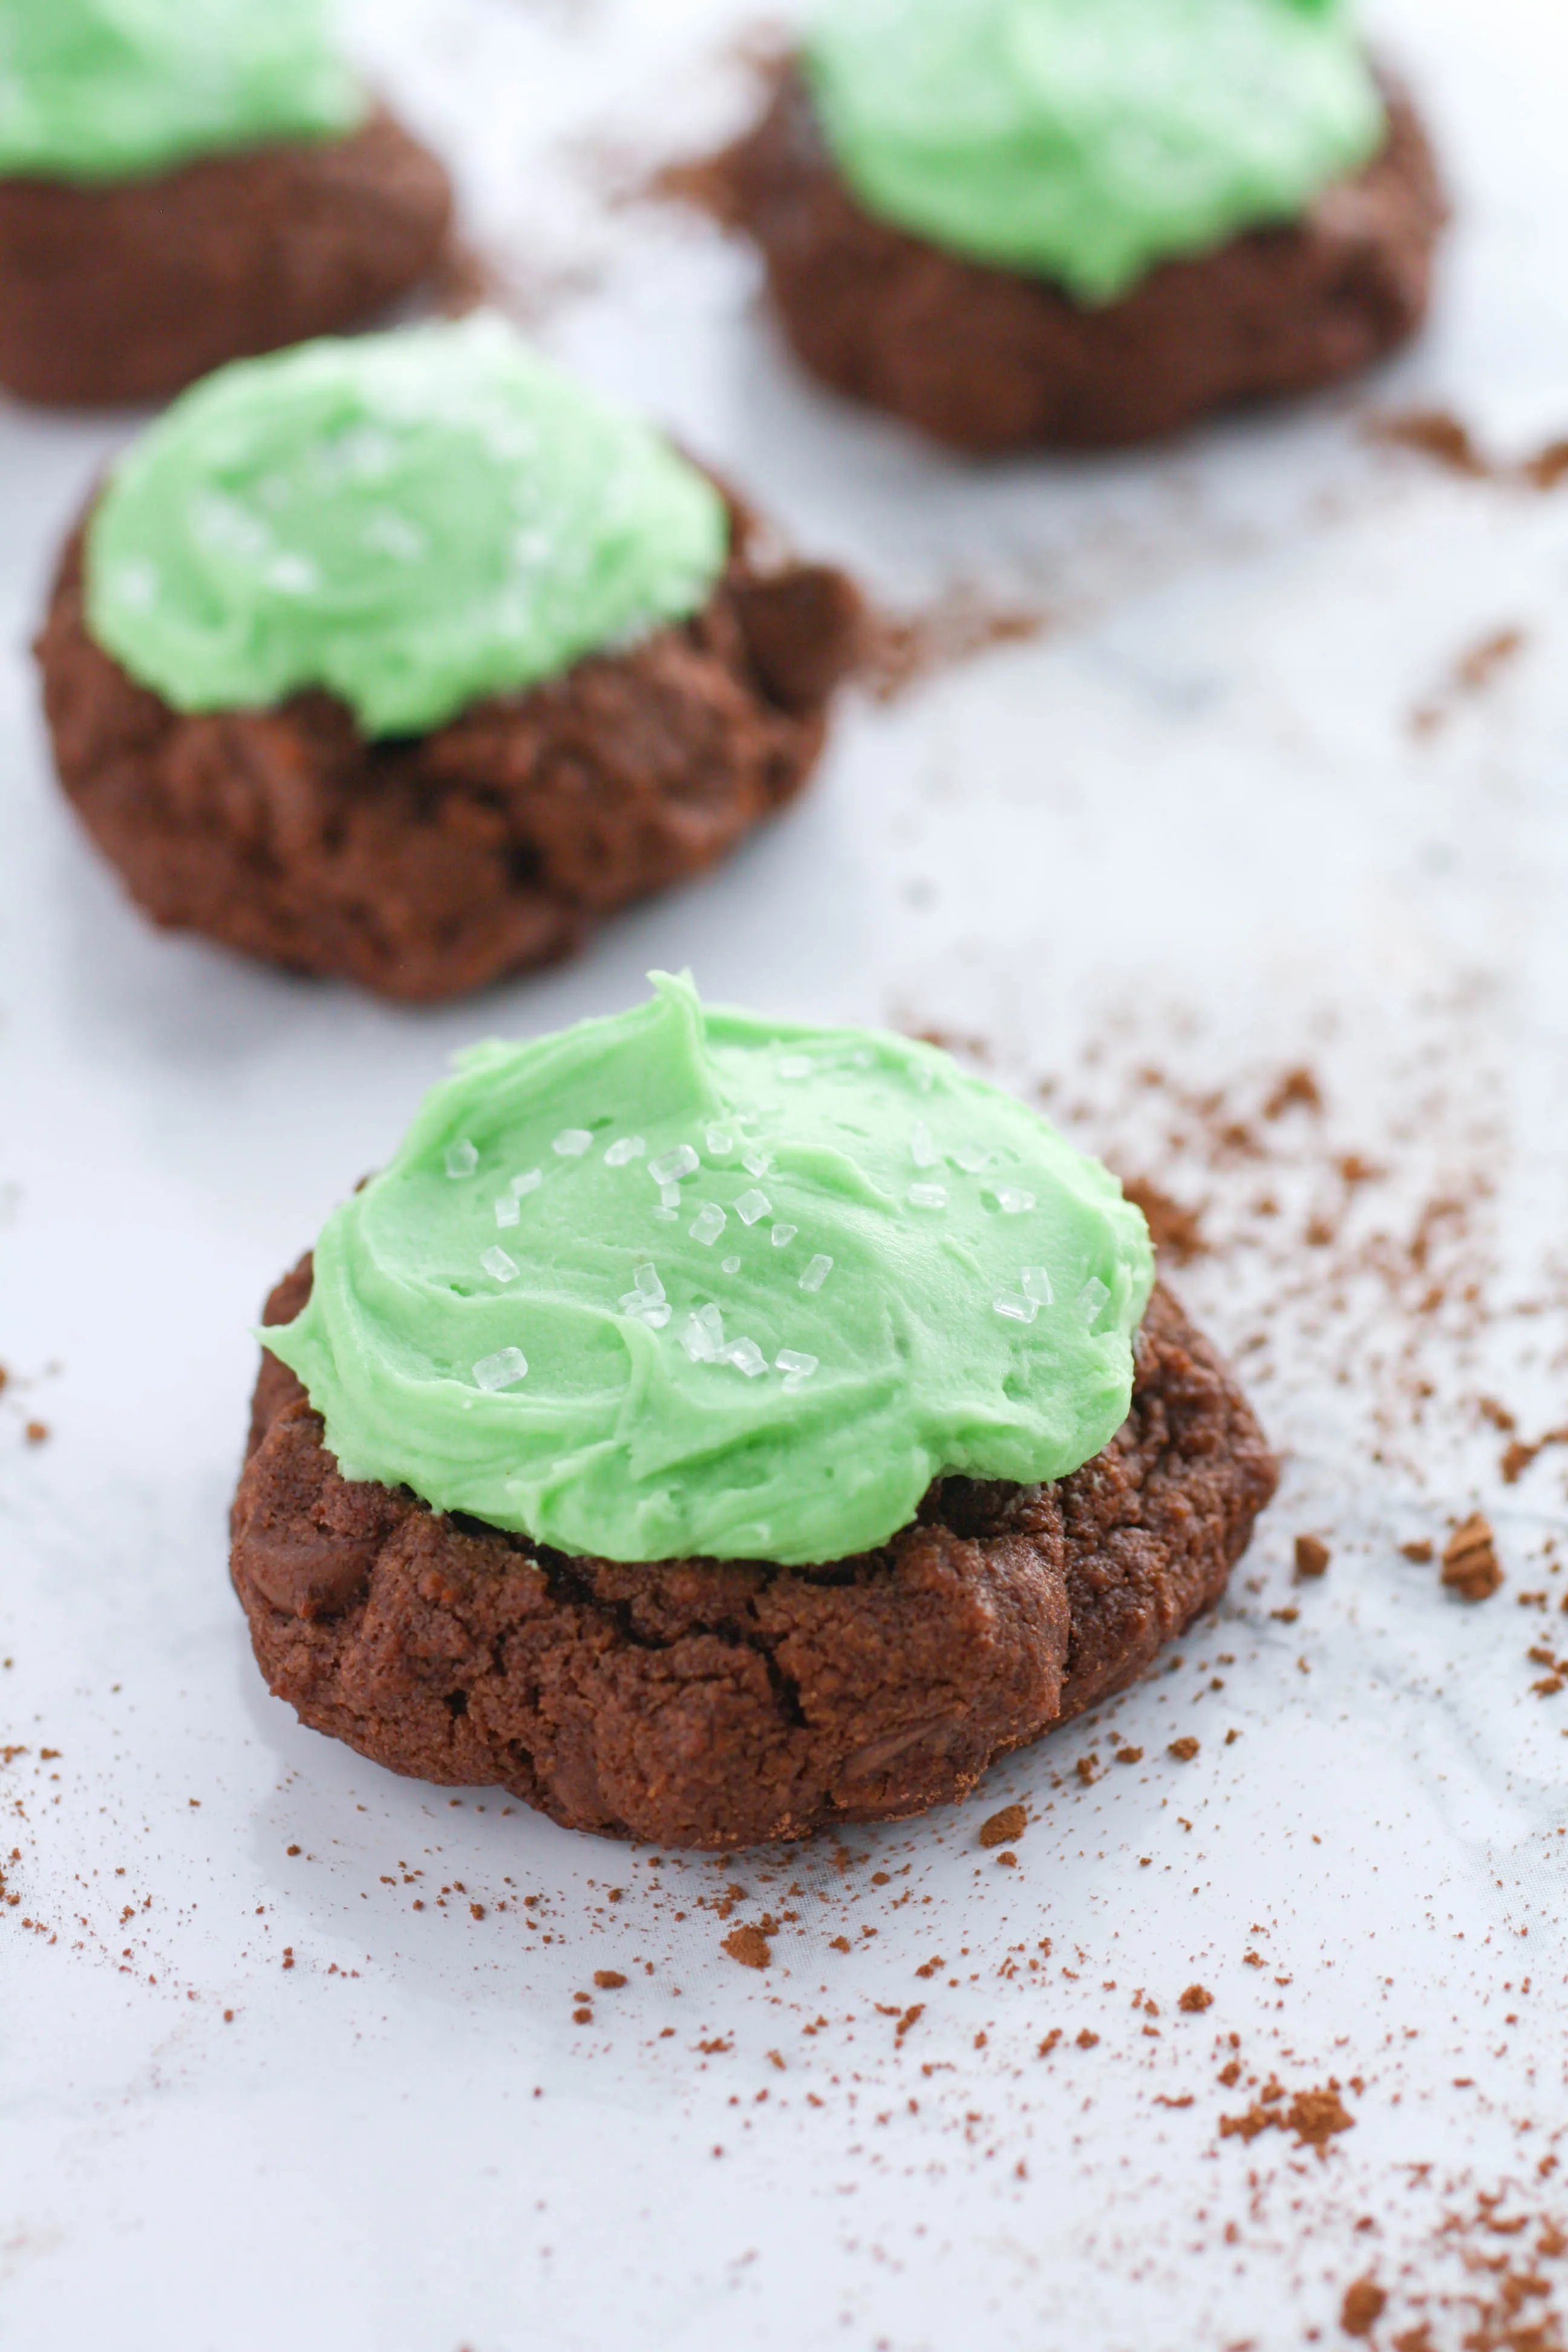 Double Chocolate Cookies with Baileys Buttercream Frosting make a fun and tasty treat! You'll love Double Chocolate Cookies with Baileys Buttercream Frosting for St. Patrick's Day fun!